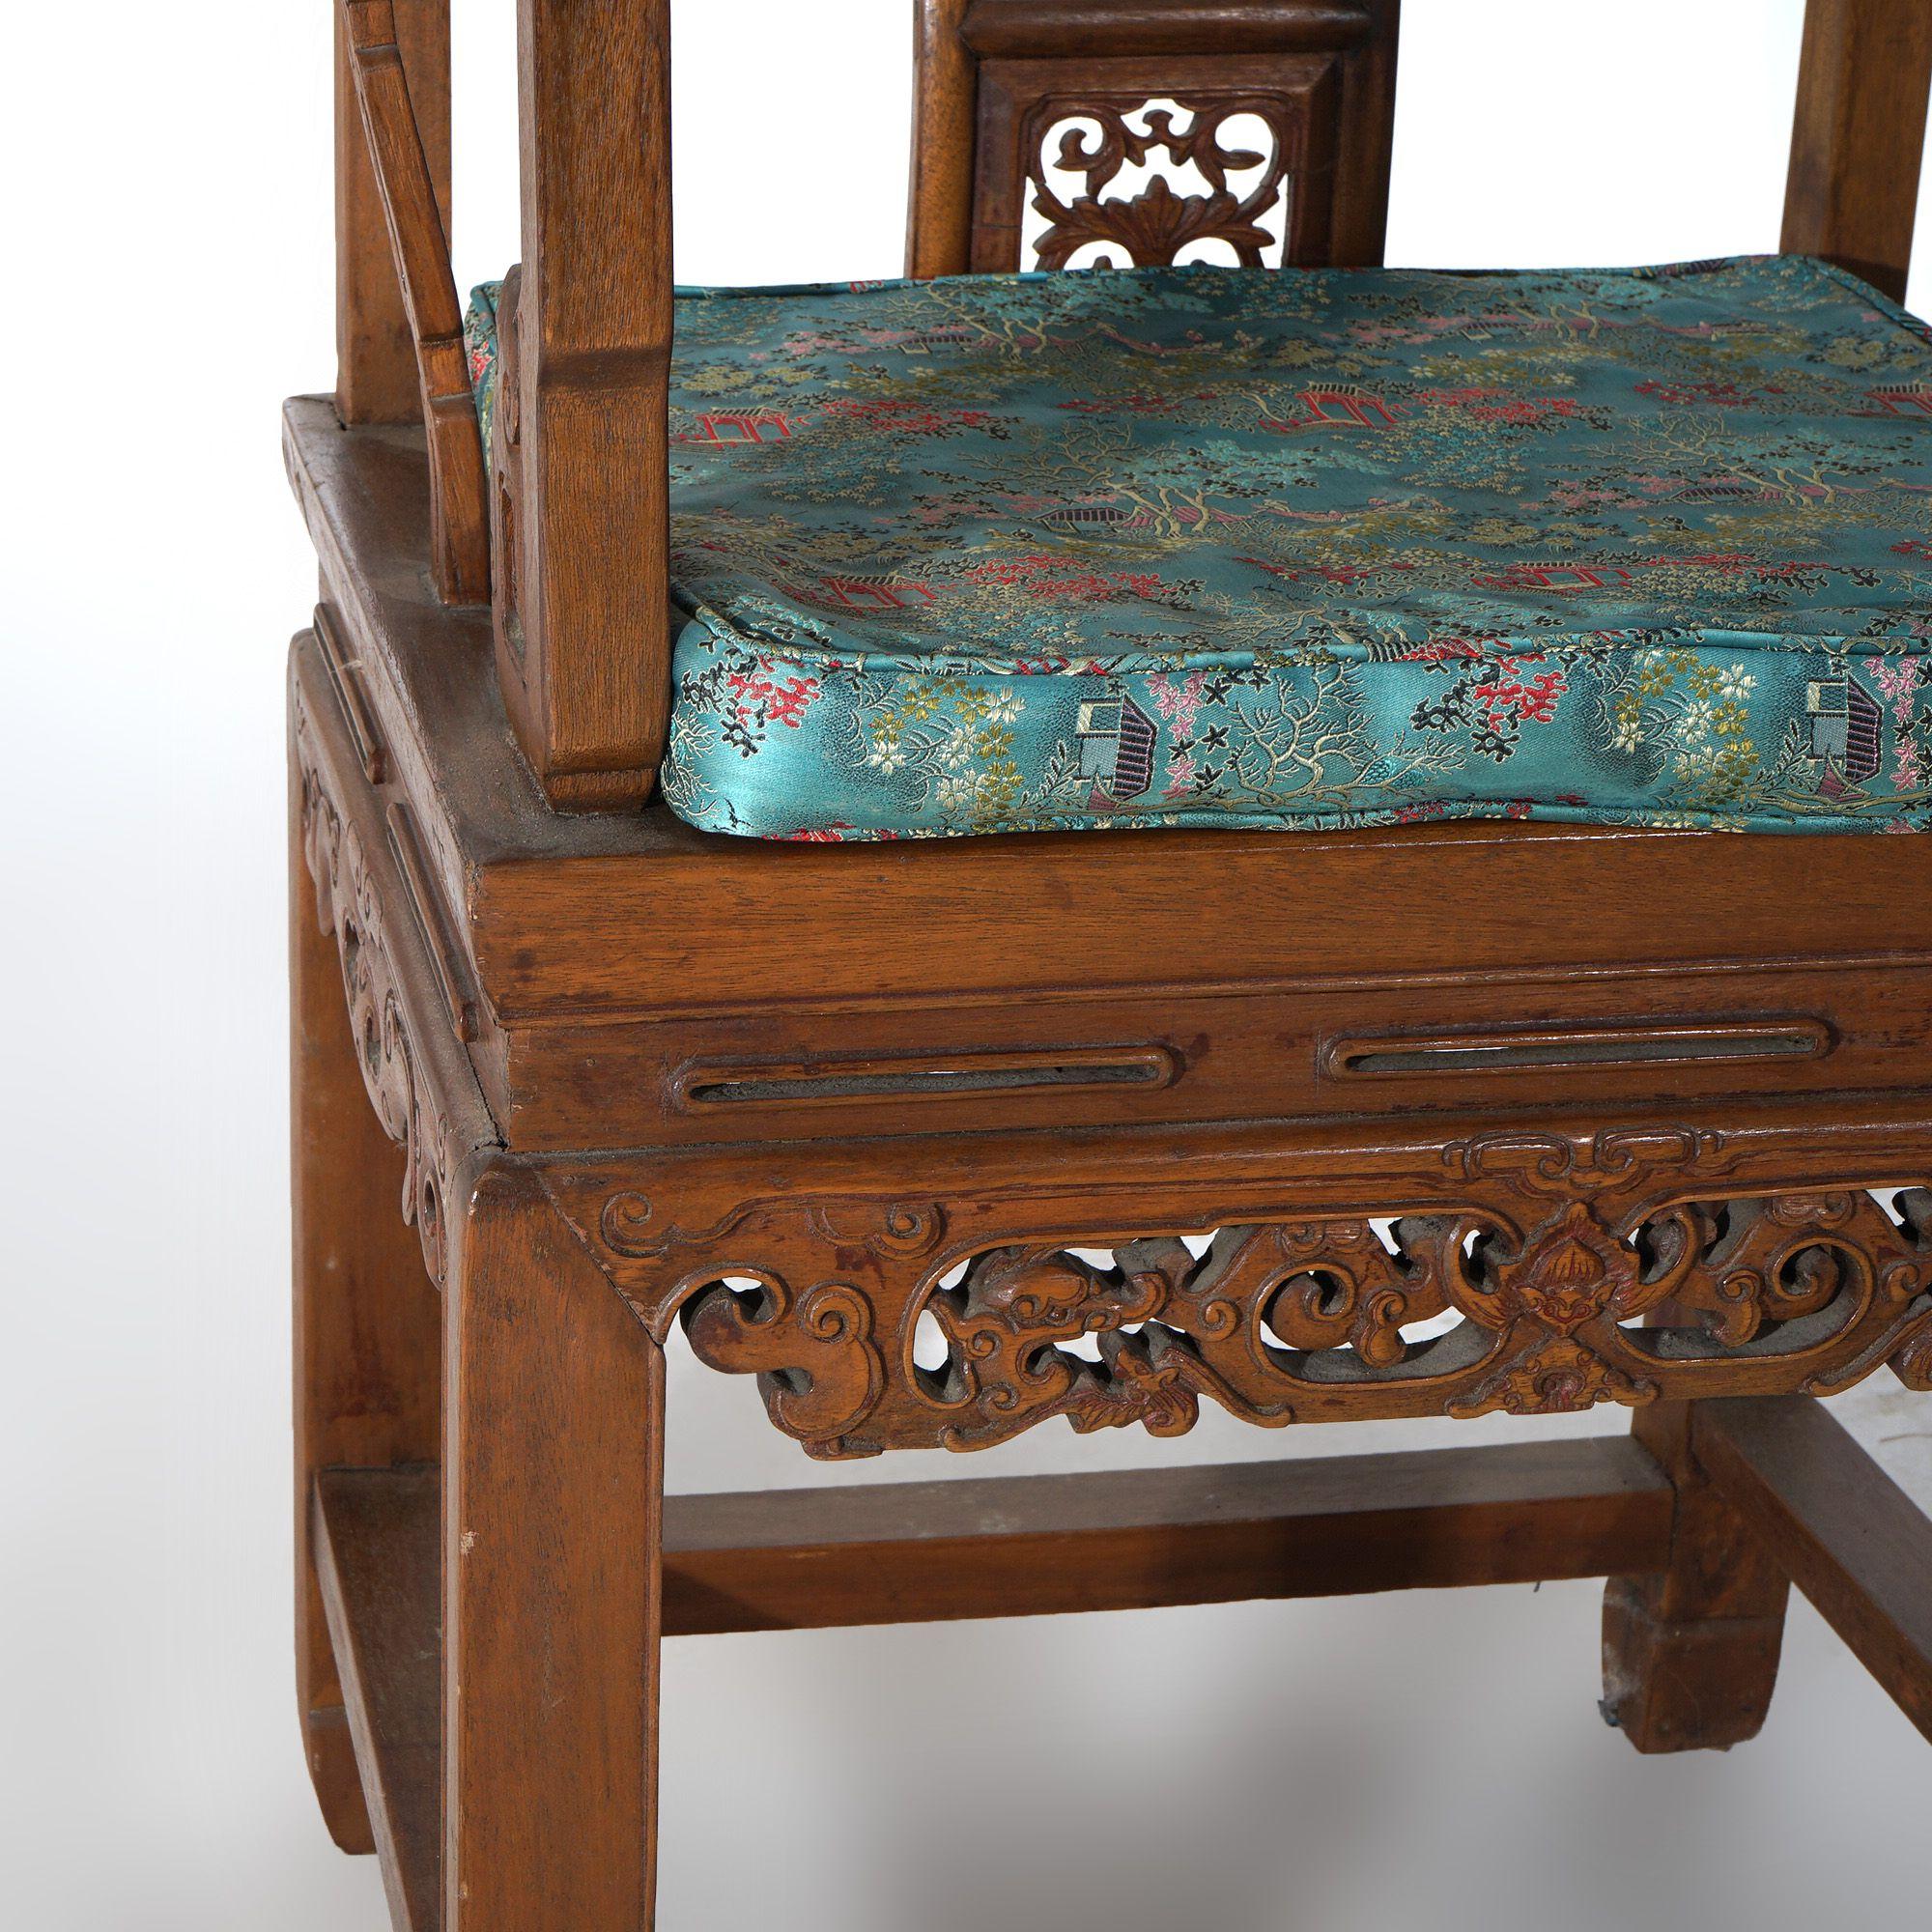 Pair of Chinese Carved Hardwood Throne Armchairs with Silk Cushions Mid-20thC For Sale 1